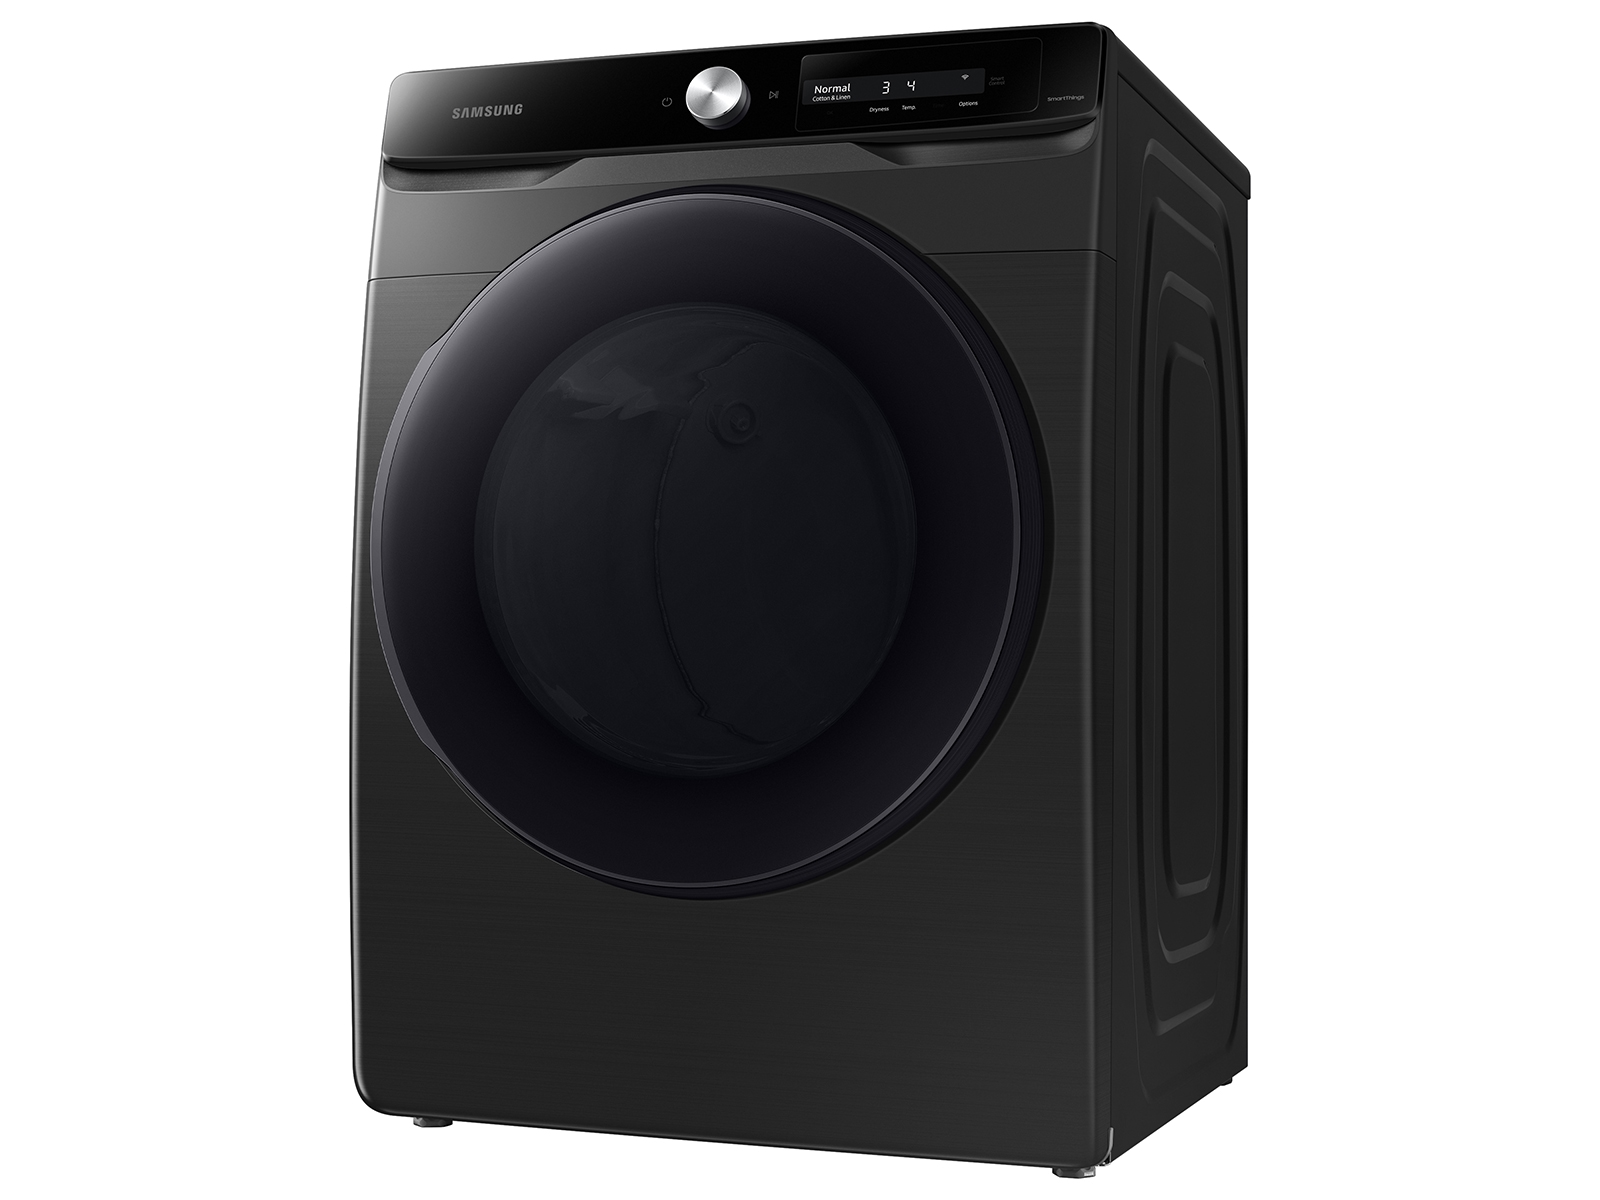 Washer and Dryers that Save Space in Apartment, Spencer's TV & Appliance